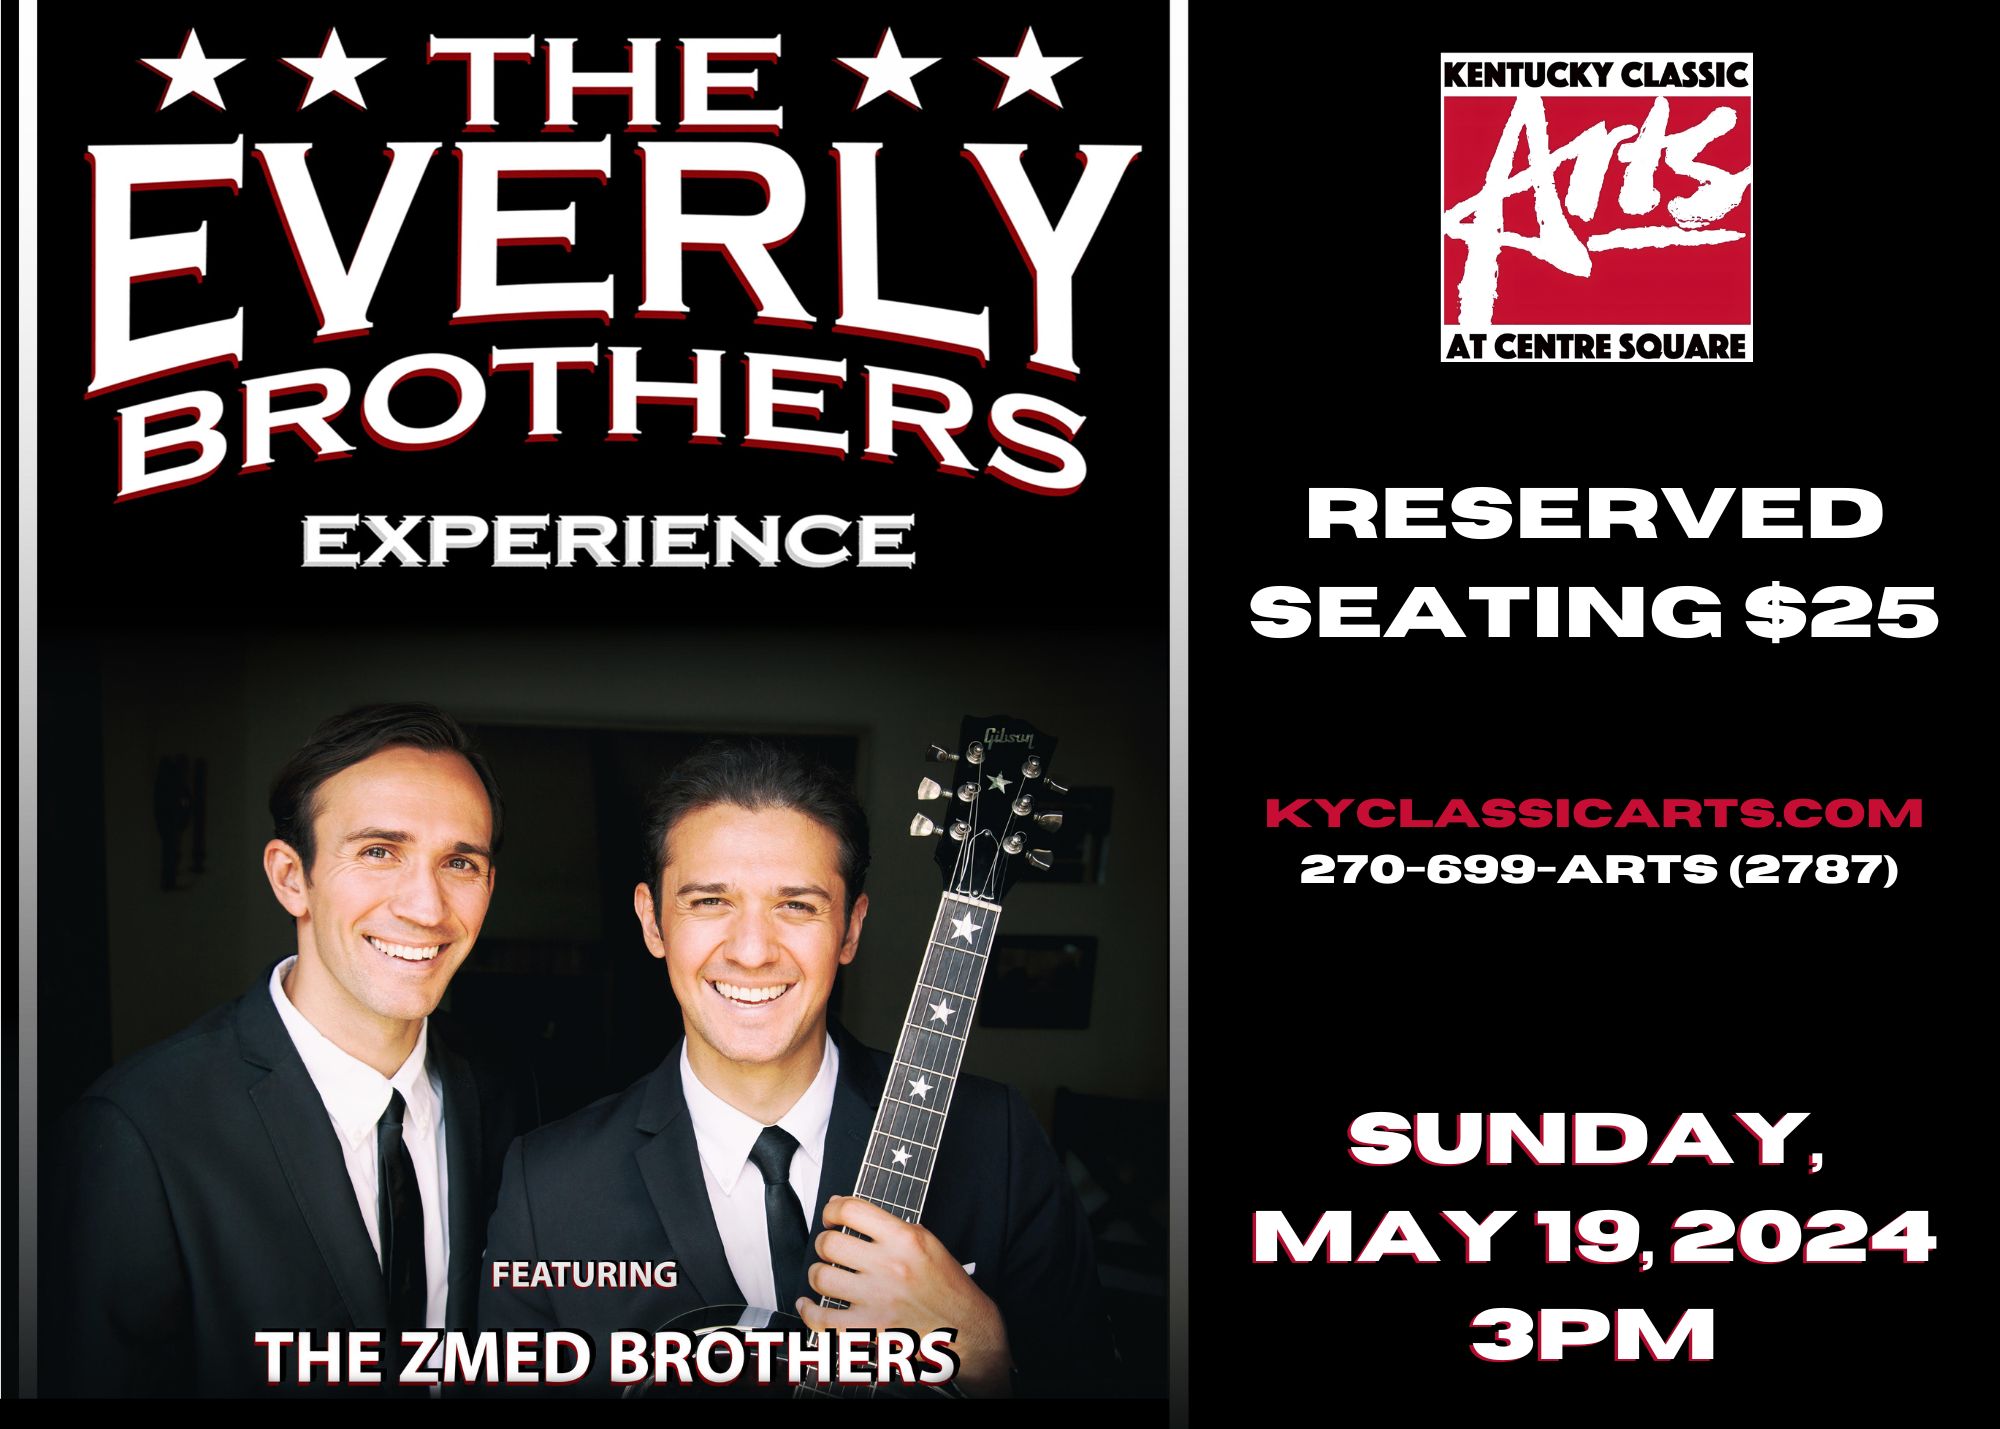 The Everly Brothers Experience Featuring the ZMed Brothers